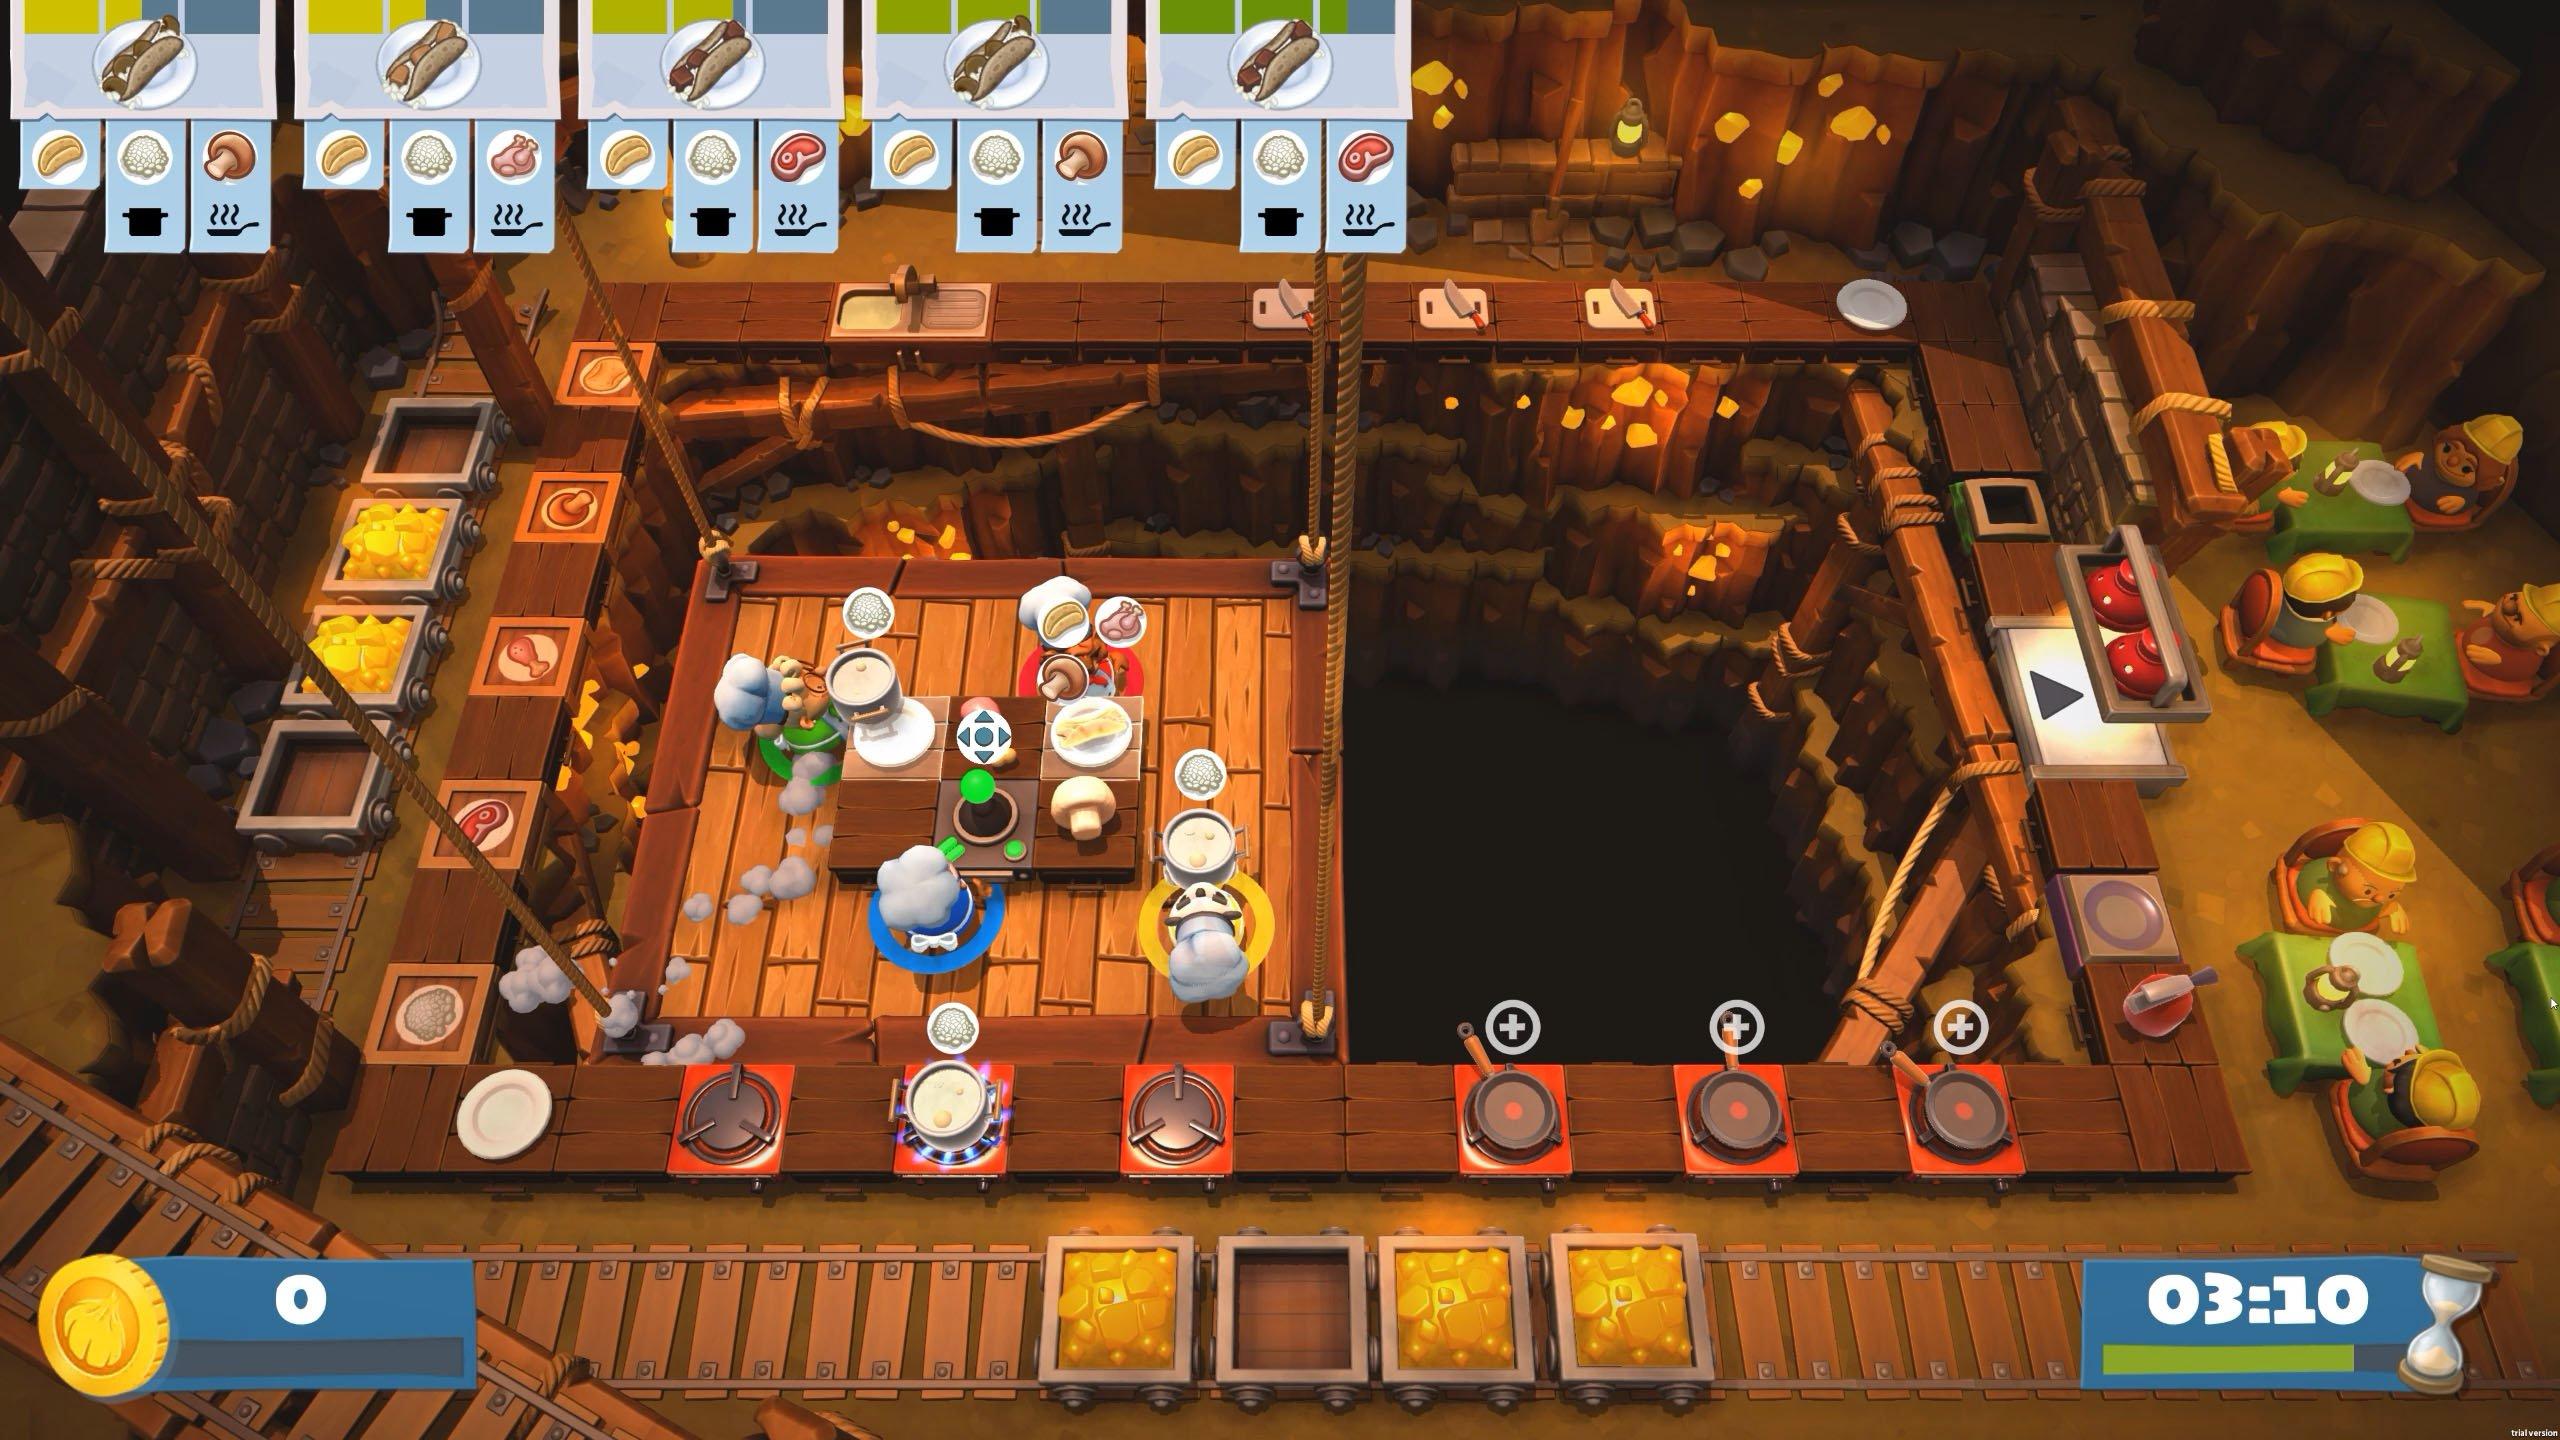 Play Overcooked! 2  Xbox Cloud Gaming (Beta) on